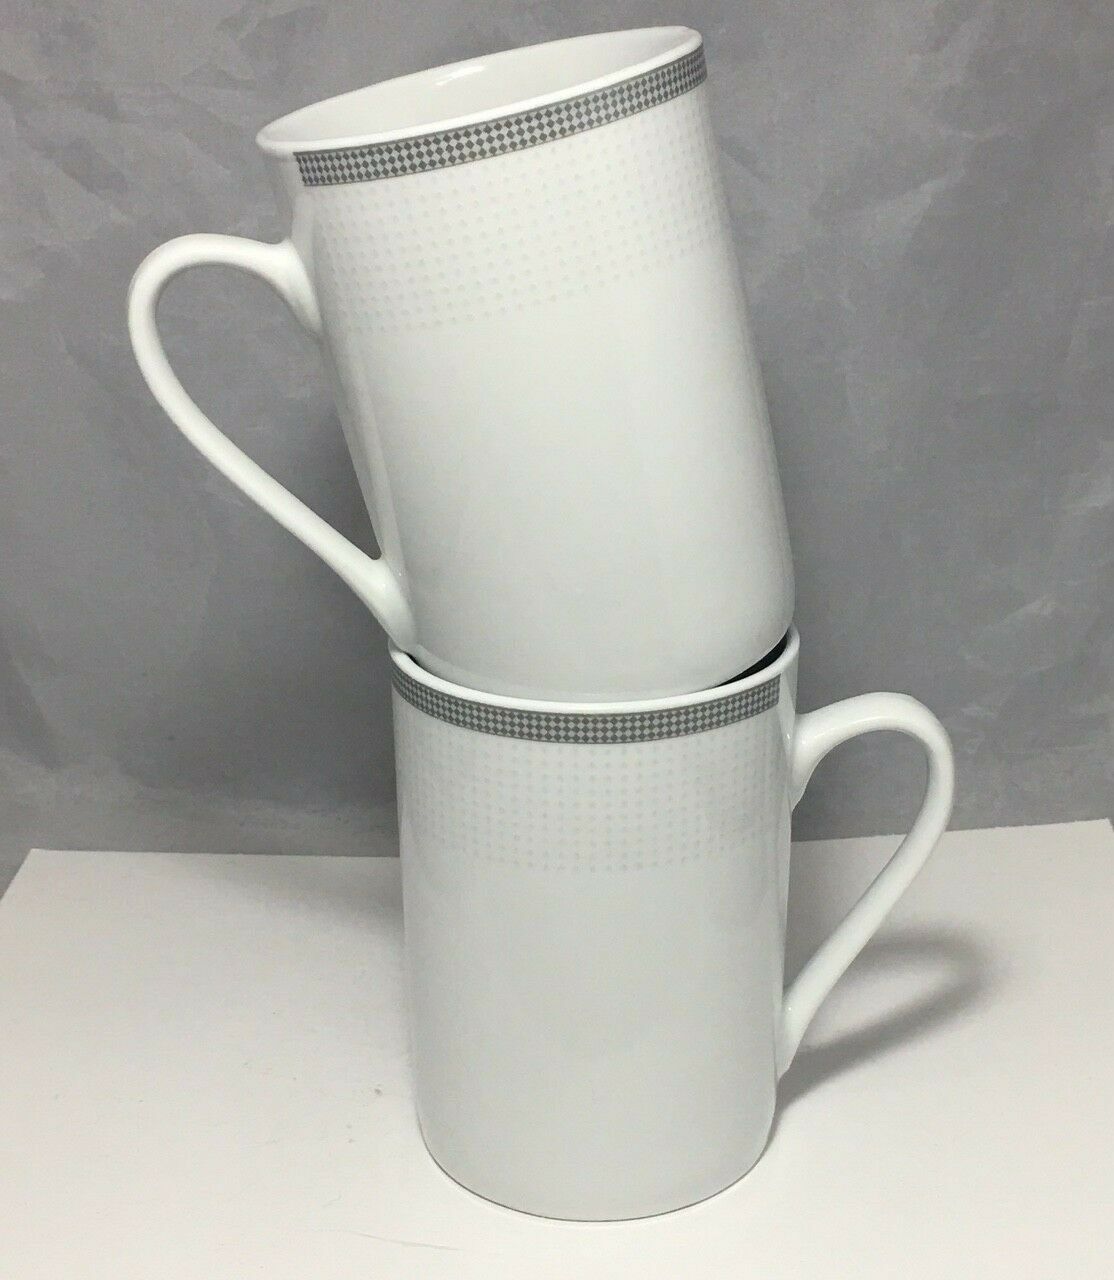 Bella Lux 2 porcelain mugs White with  polka-dost and silver checkers trim - $6.99